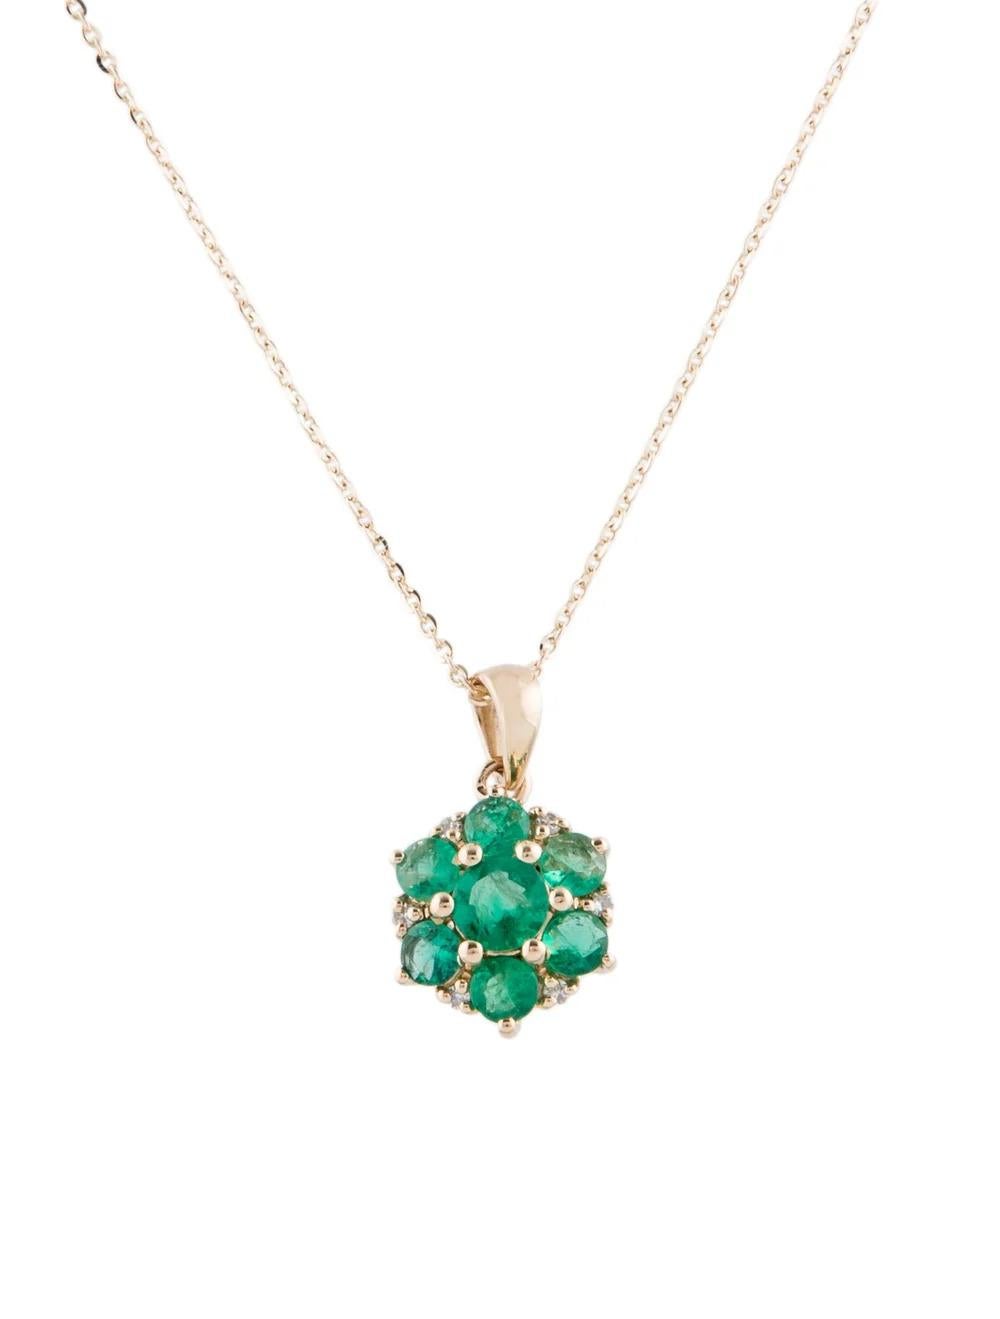 Step into elegance with this exquisite 14K yellow gold pendant necklace, showcasing a captivating 0.74 carat round brilliant emerald. Crafted to perfection, this piece exudes sophistication and timeless beauty, making it a standout addition to any